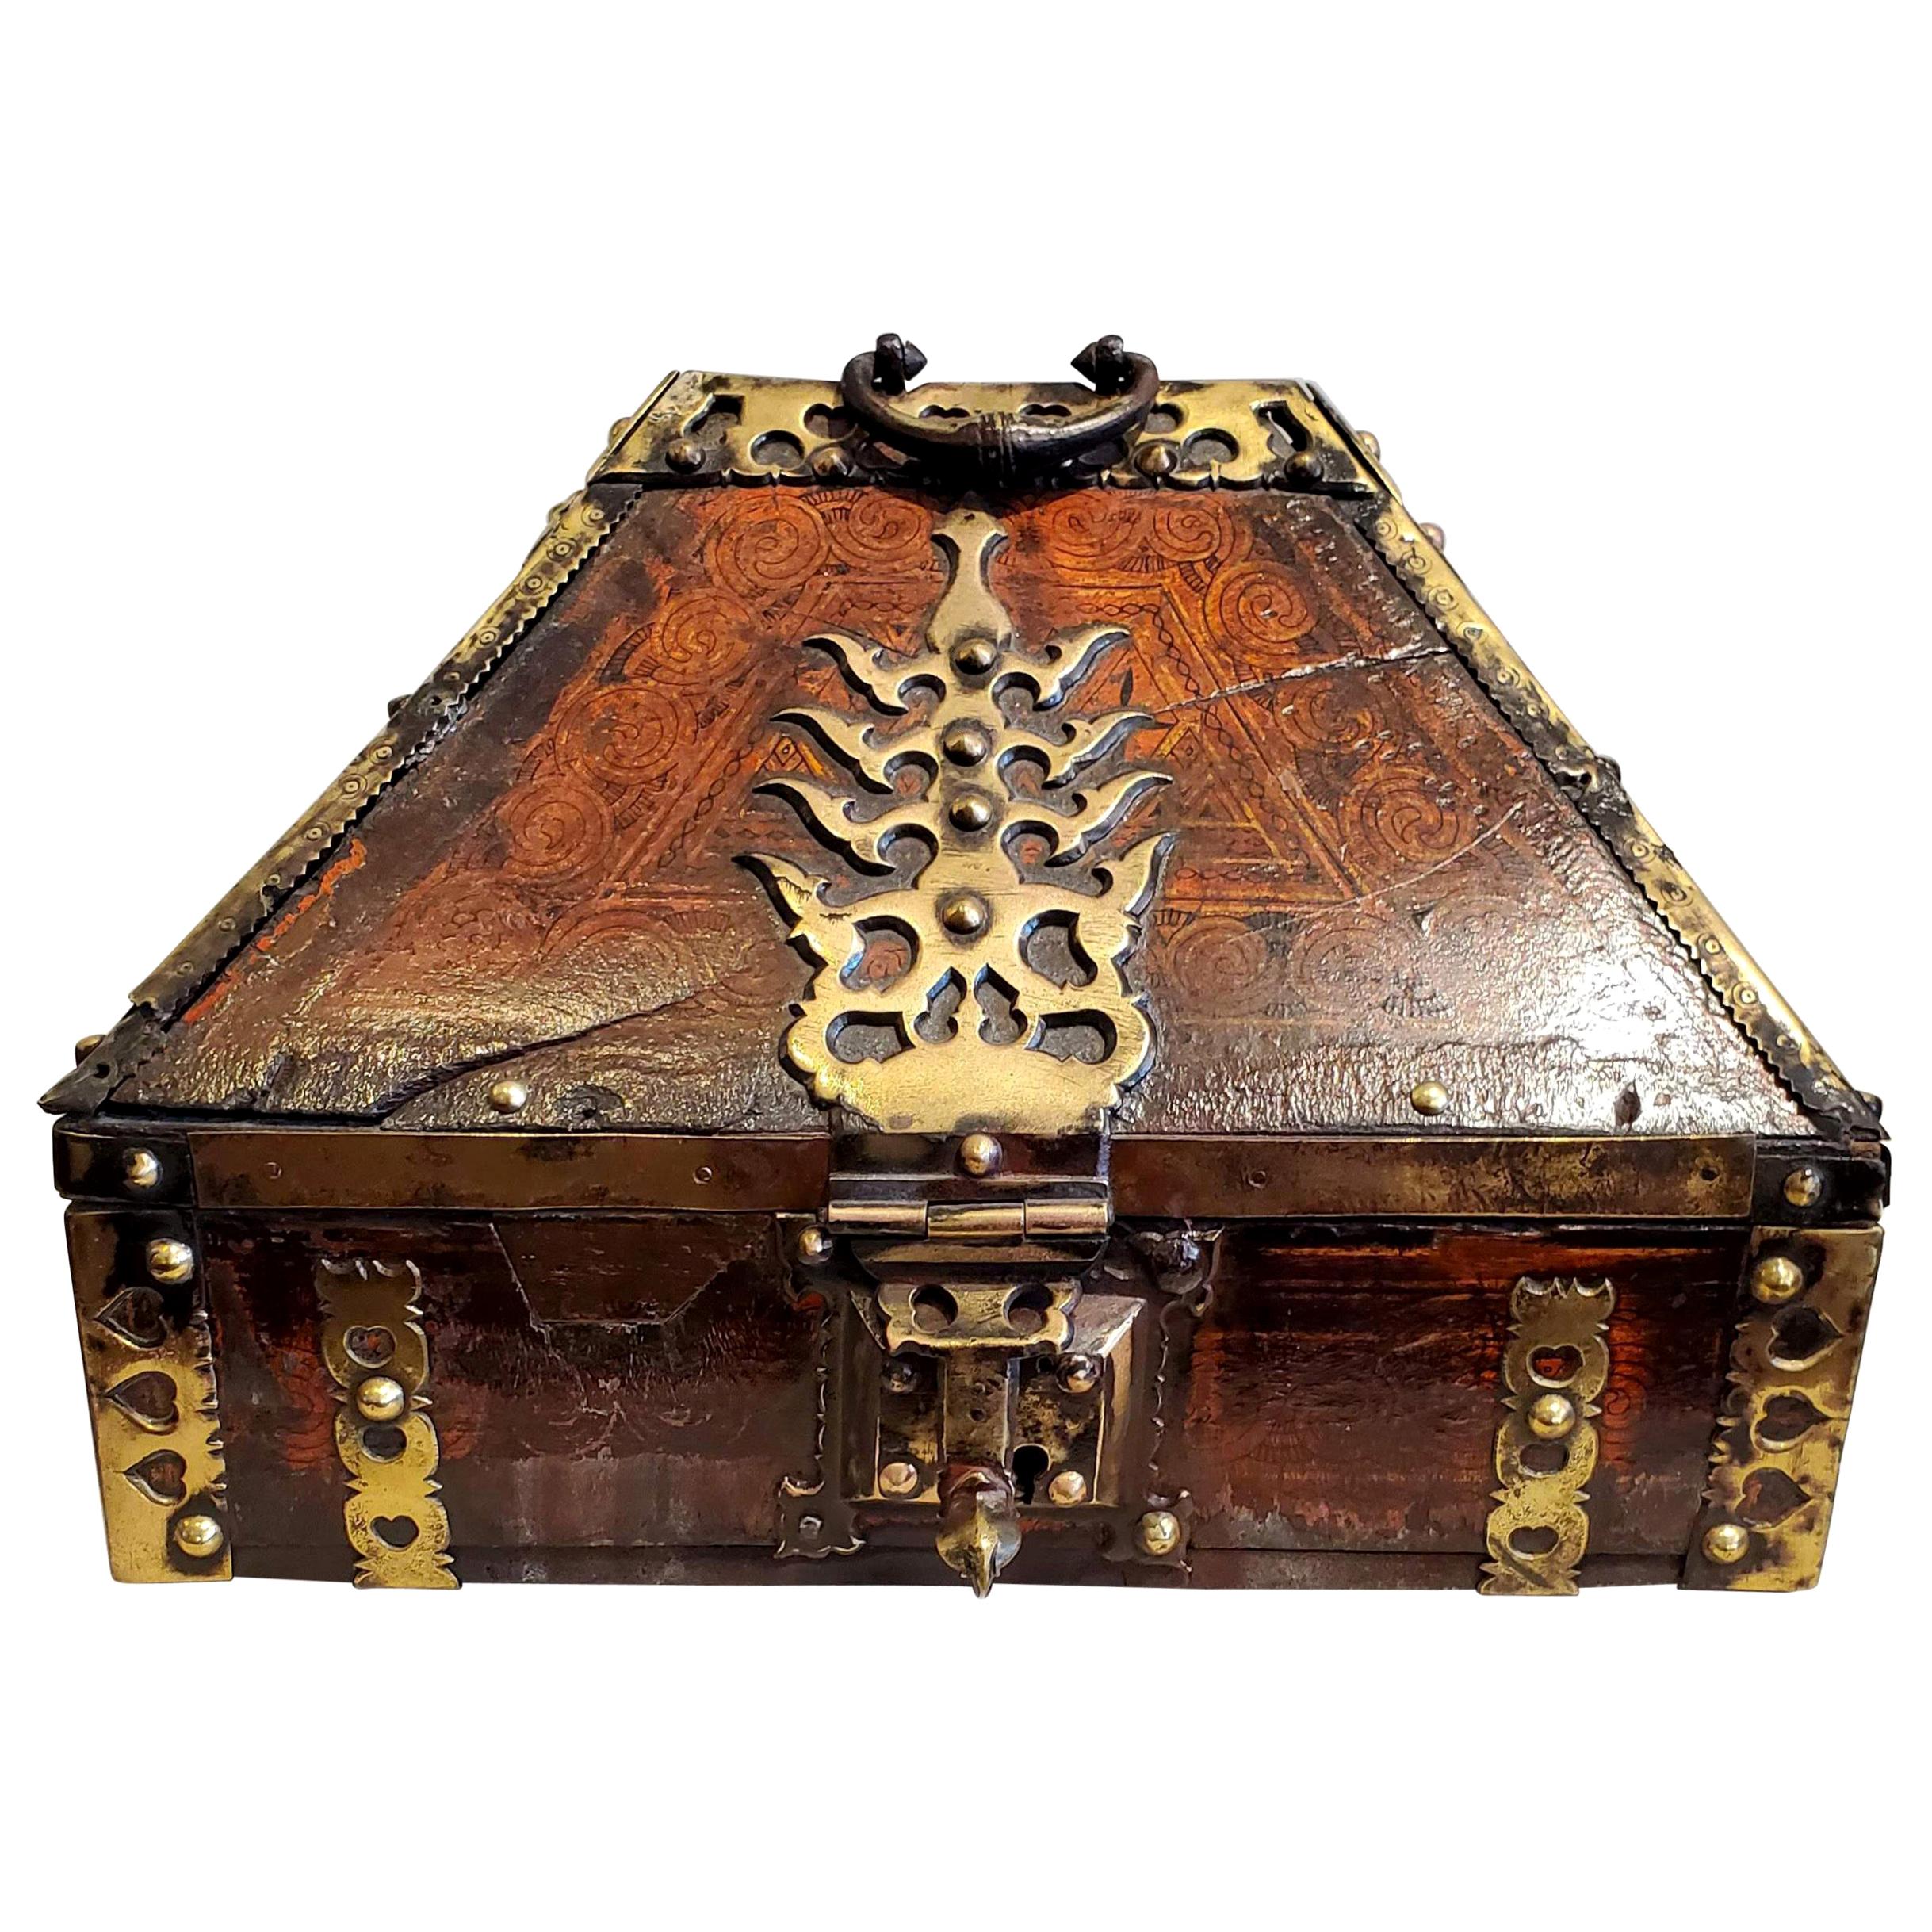 Late 18th Century Lacquered Teak with Decorative Brass Indian Dowry Box For Sale